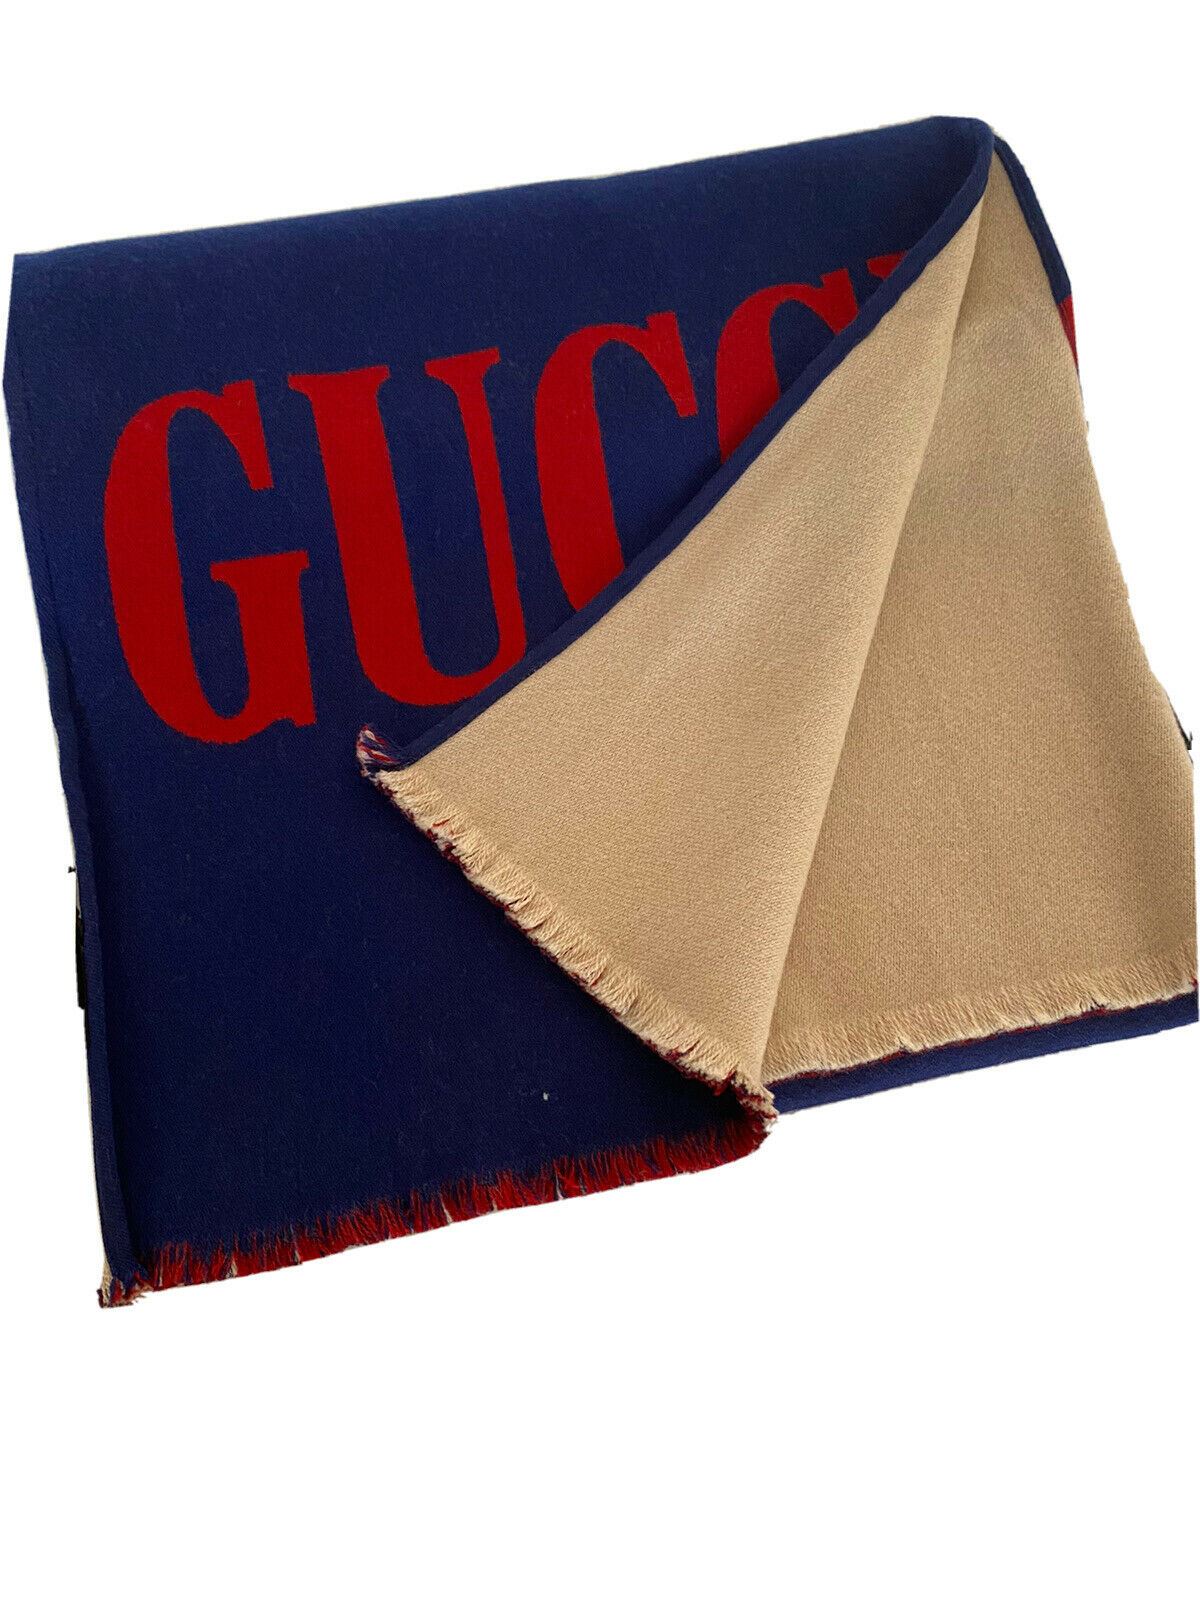 NWT Gucci Guccium Blue Wool/Silk Scarf 525559 35x180 Made in Italy